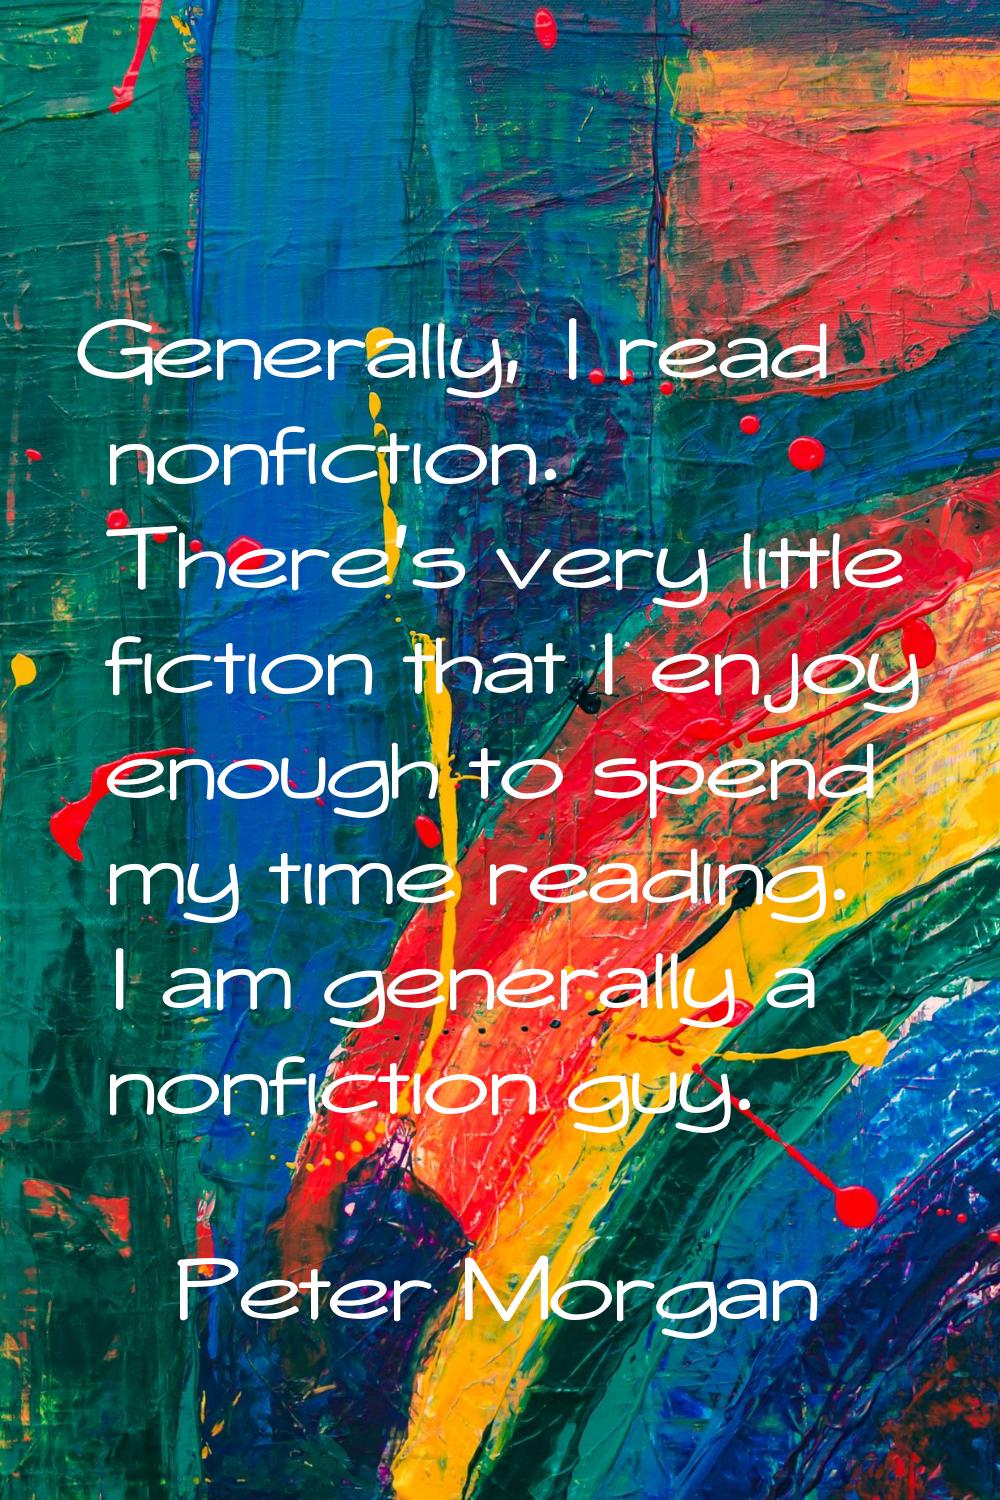 Generally, I read nonfiction. There's very little fiction that I enjoy enough to spend my time read